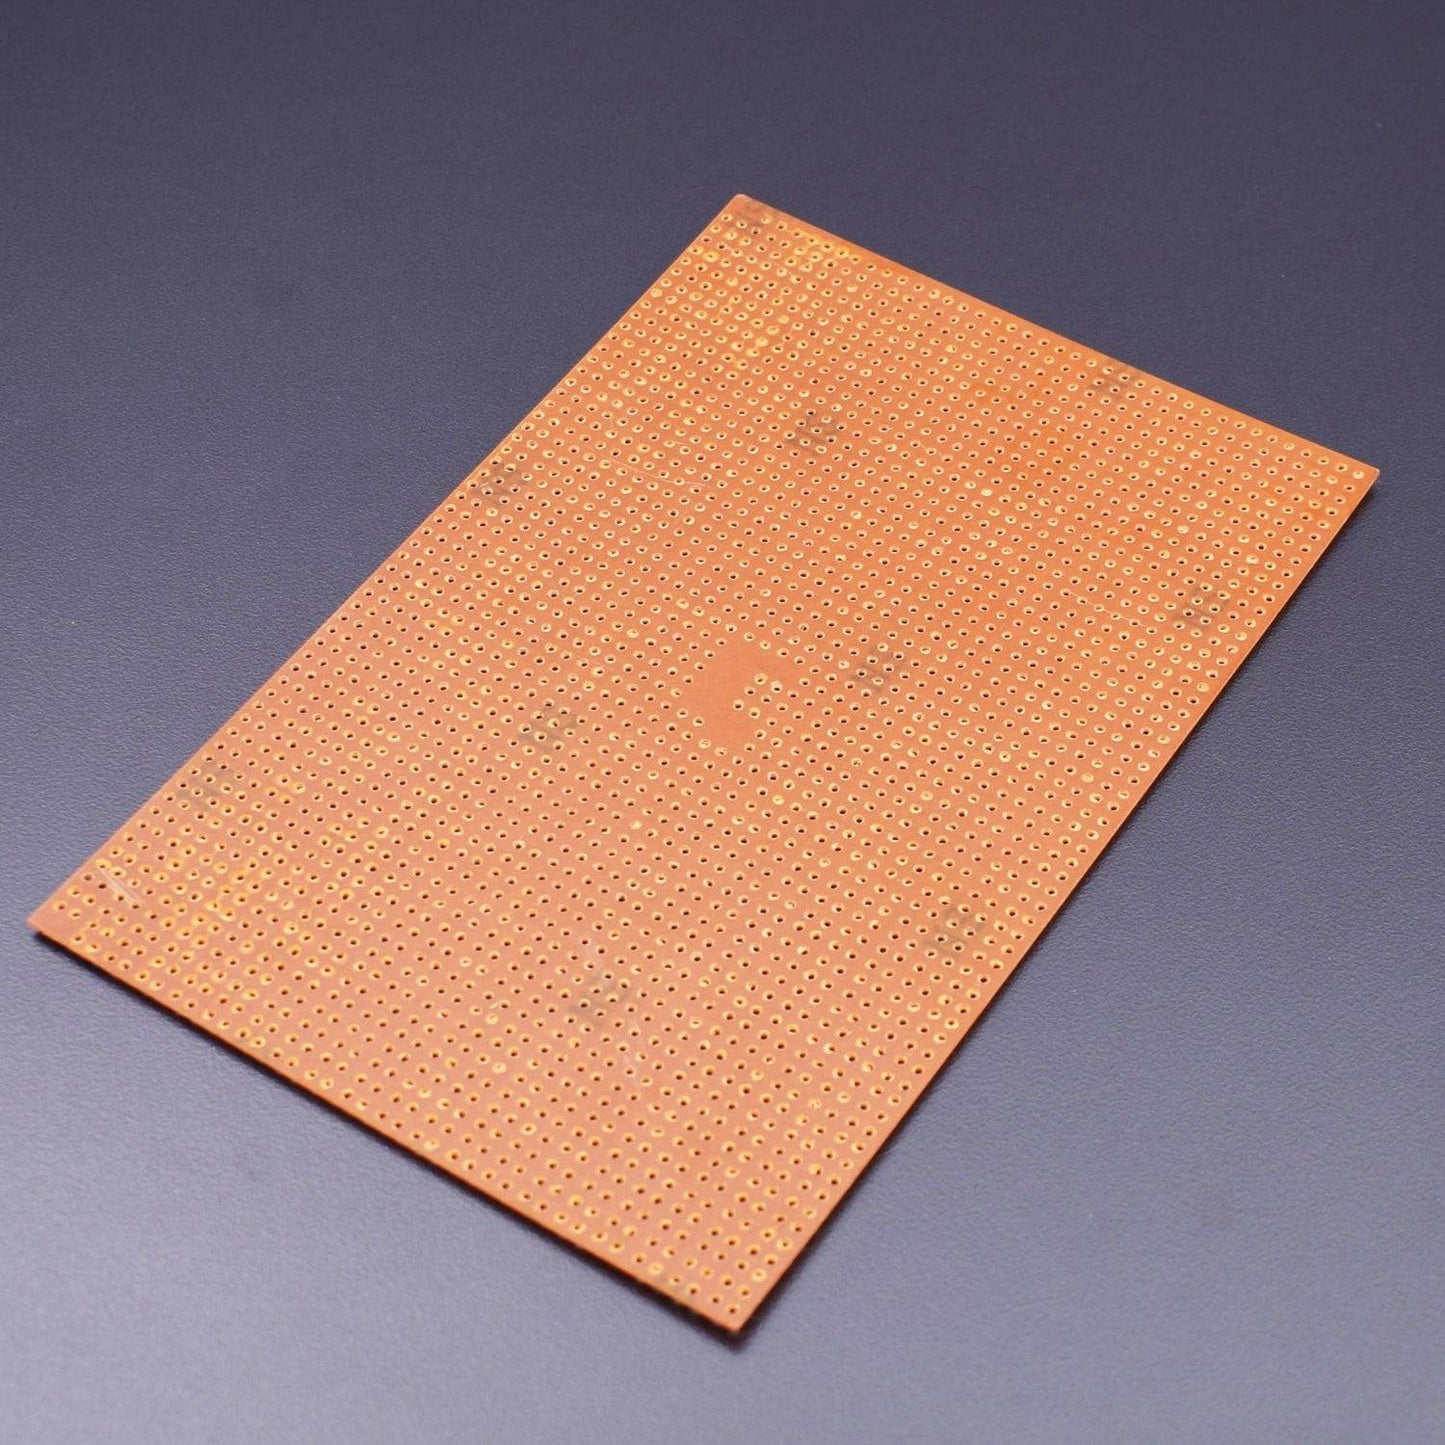 10 x 7 CM PCB Printed Circuit Board for Electronic Circuit - PB002 - REES52